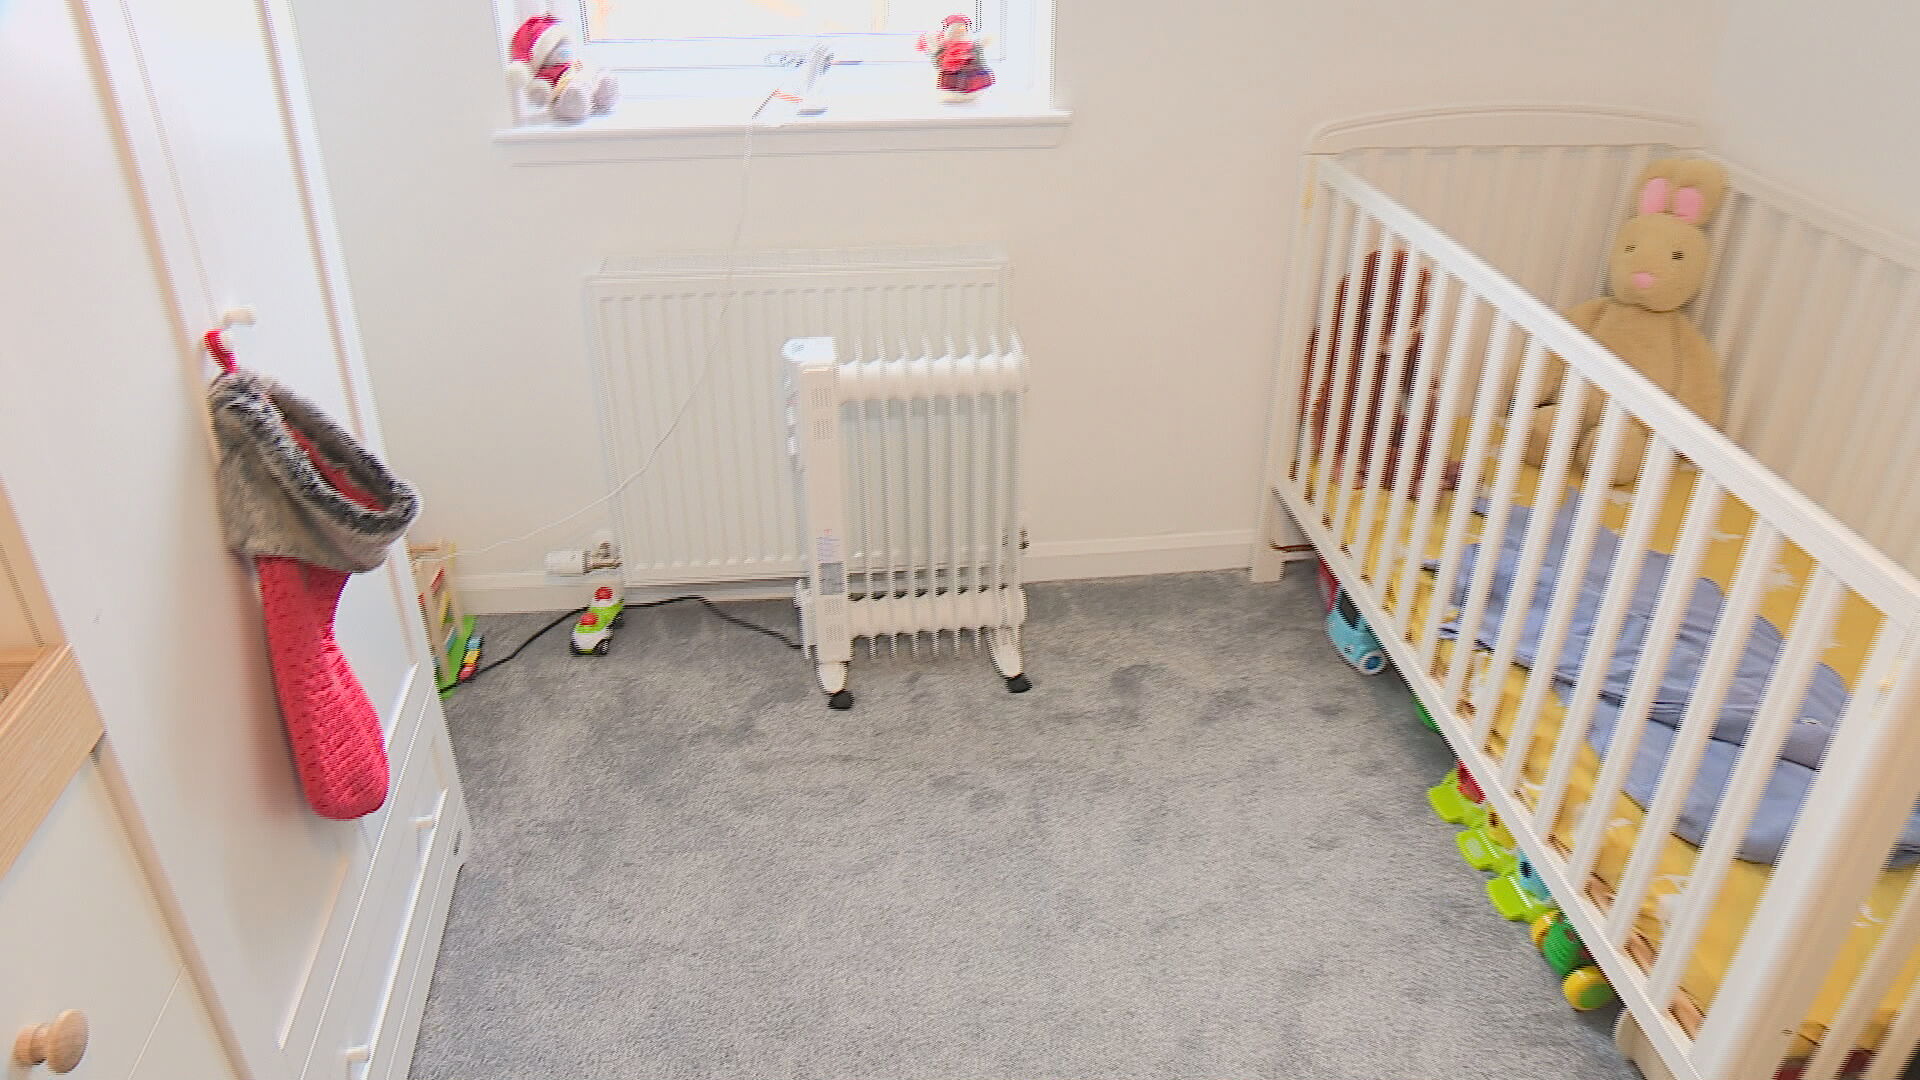 Families have resorted to plug-in radiators to keep their children warm at night